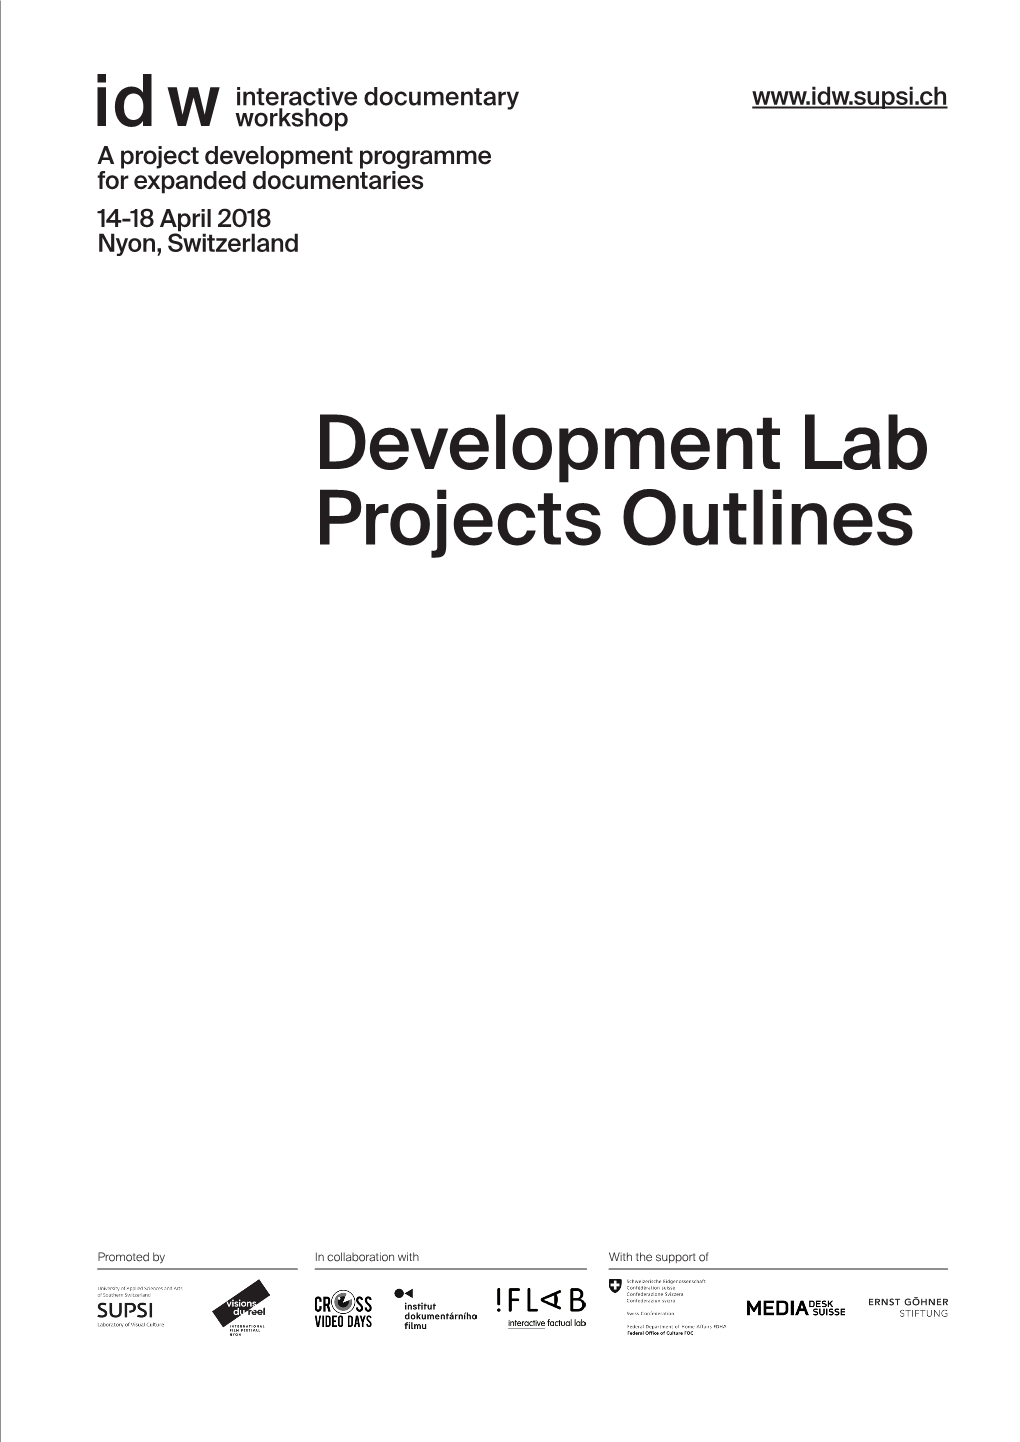 Development Lab Projects Outlines